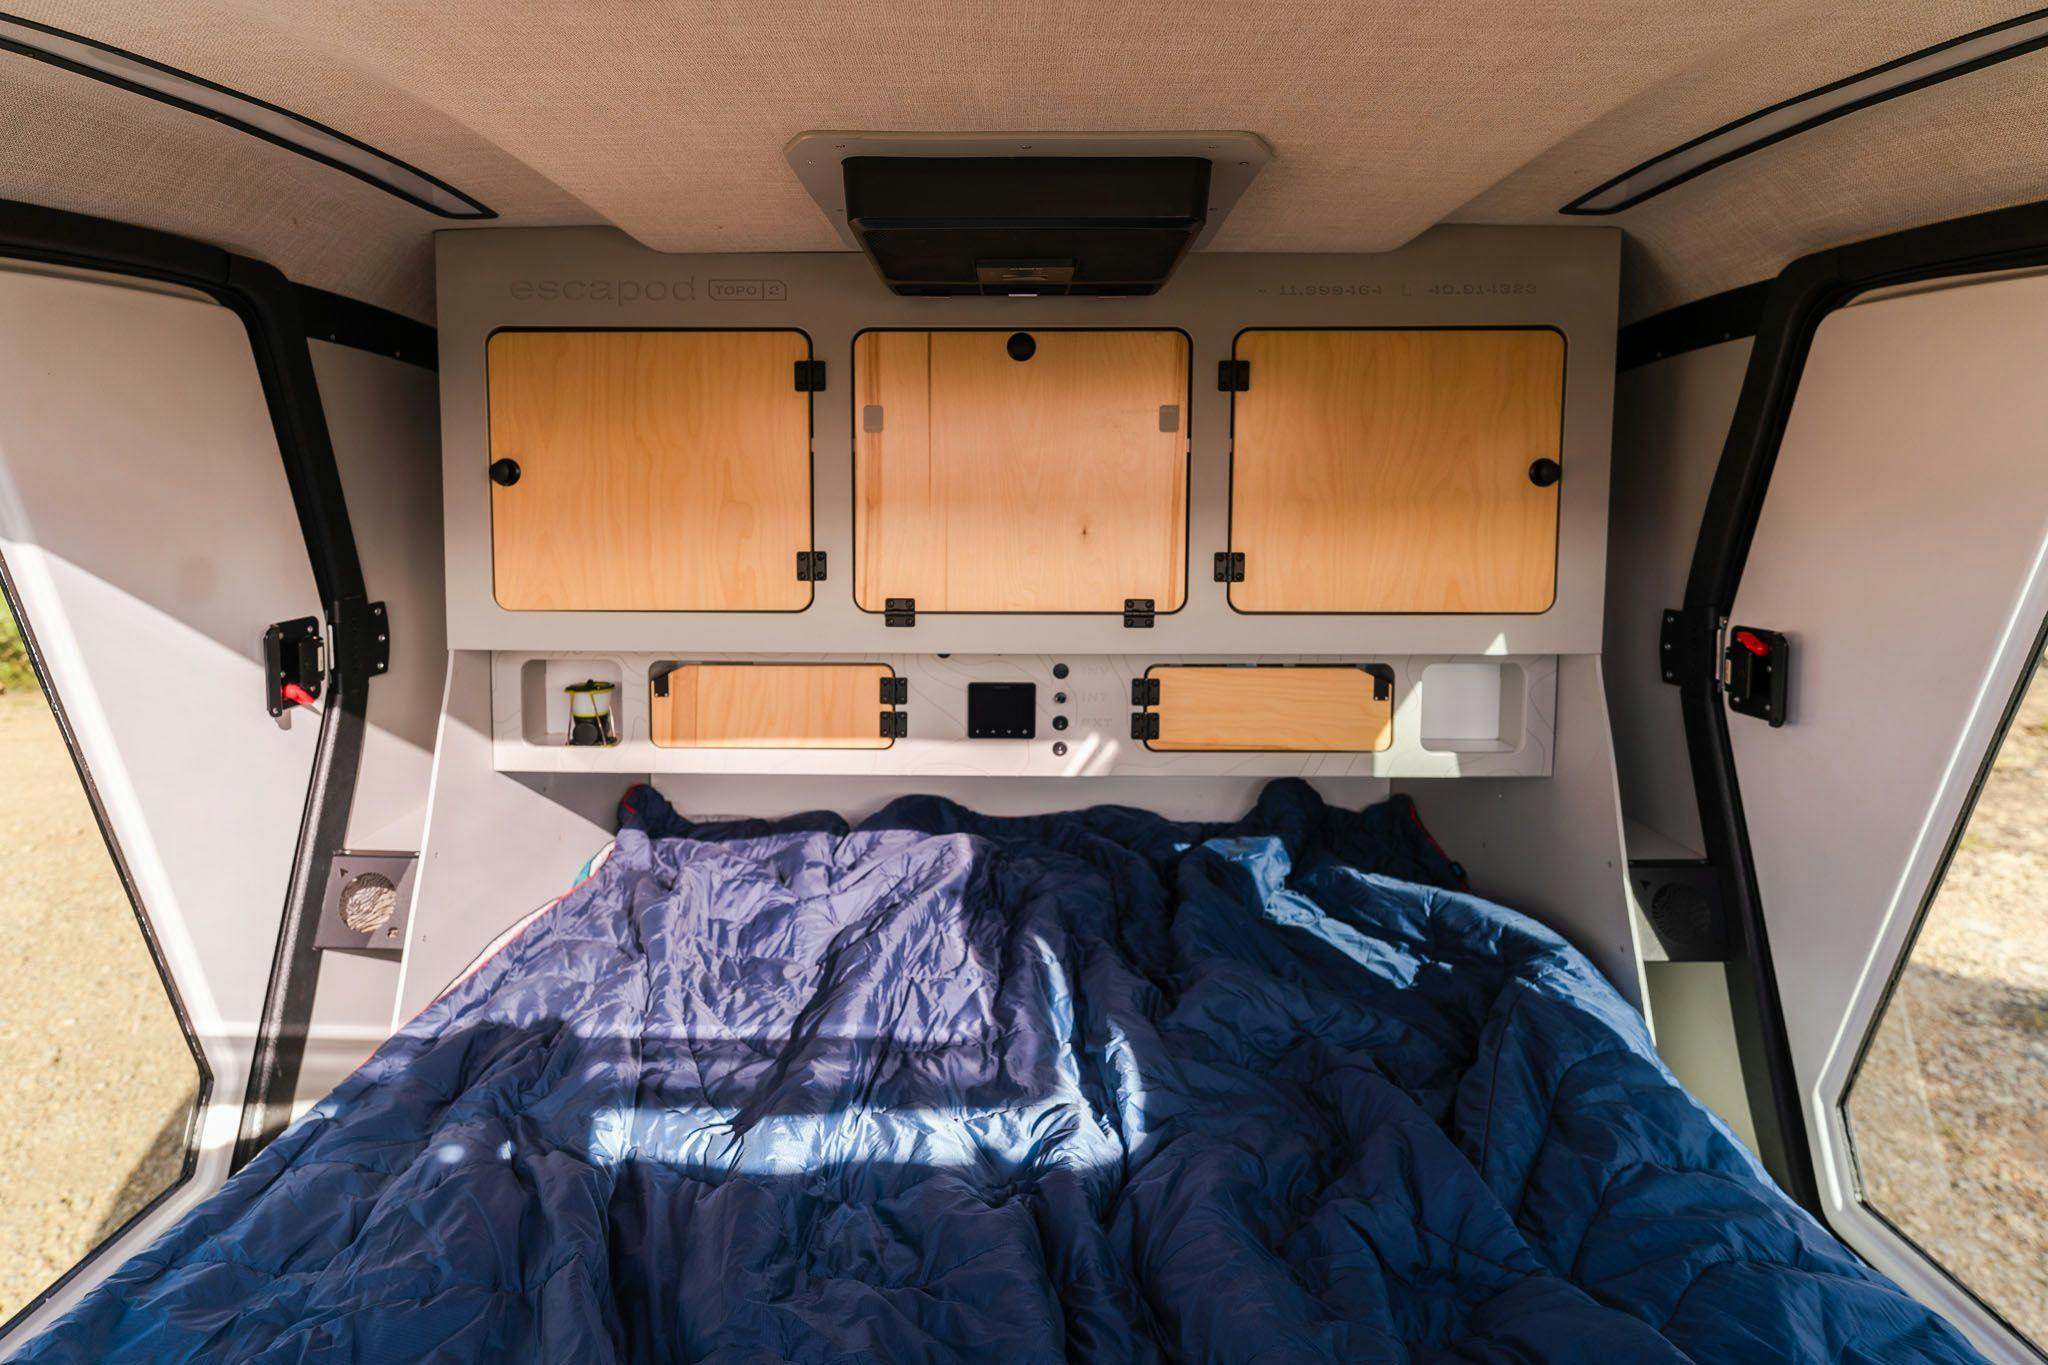 The interior of a teardrop camper, displaying a queen bed, double doors, and a stargazer window